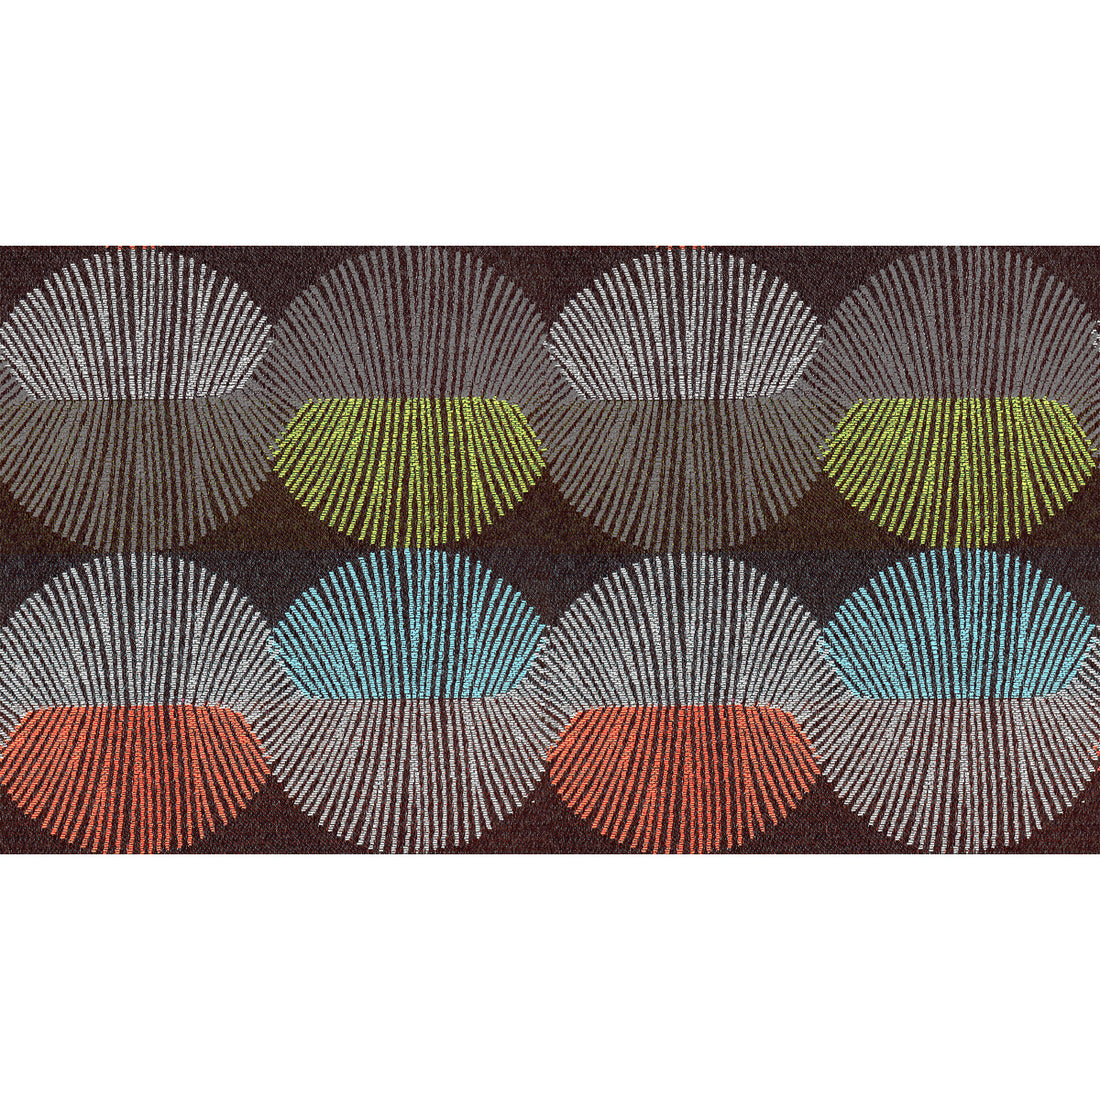 Match Maker fabric in pop color - pattern 34650.814.0 - by Kravet Contract in the Gis collection